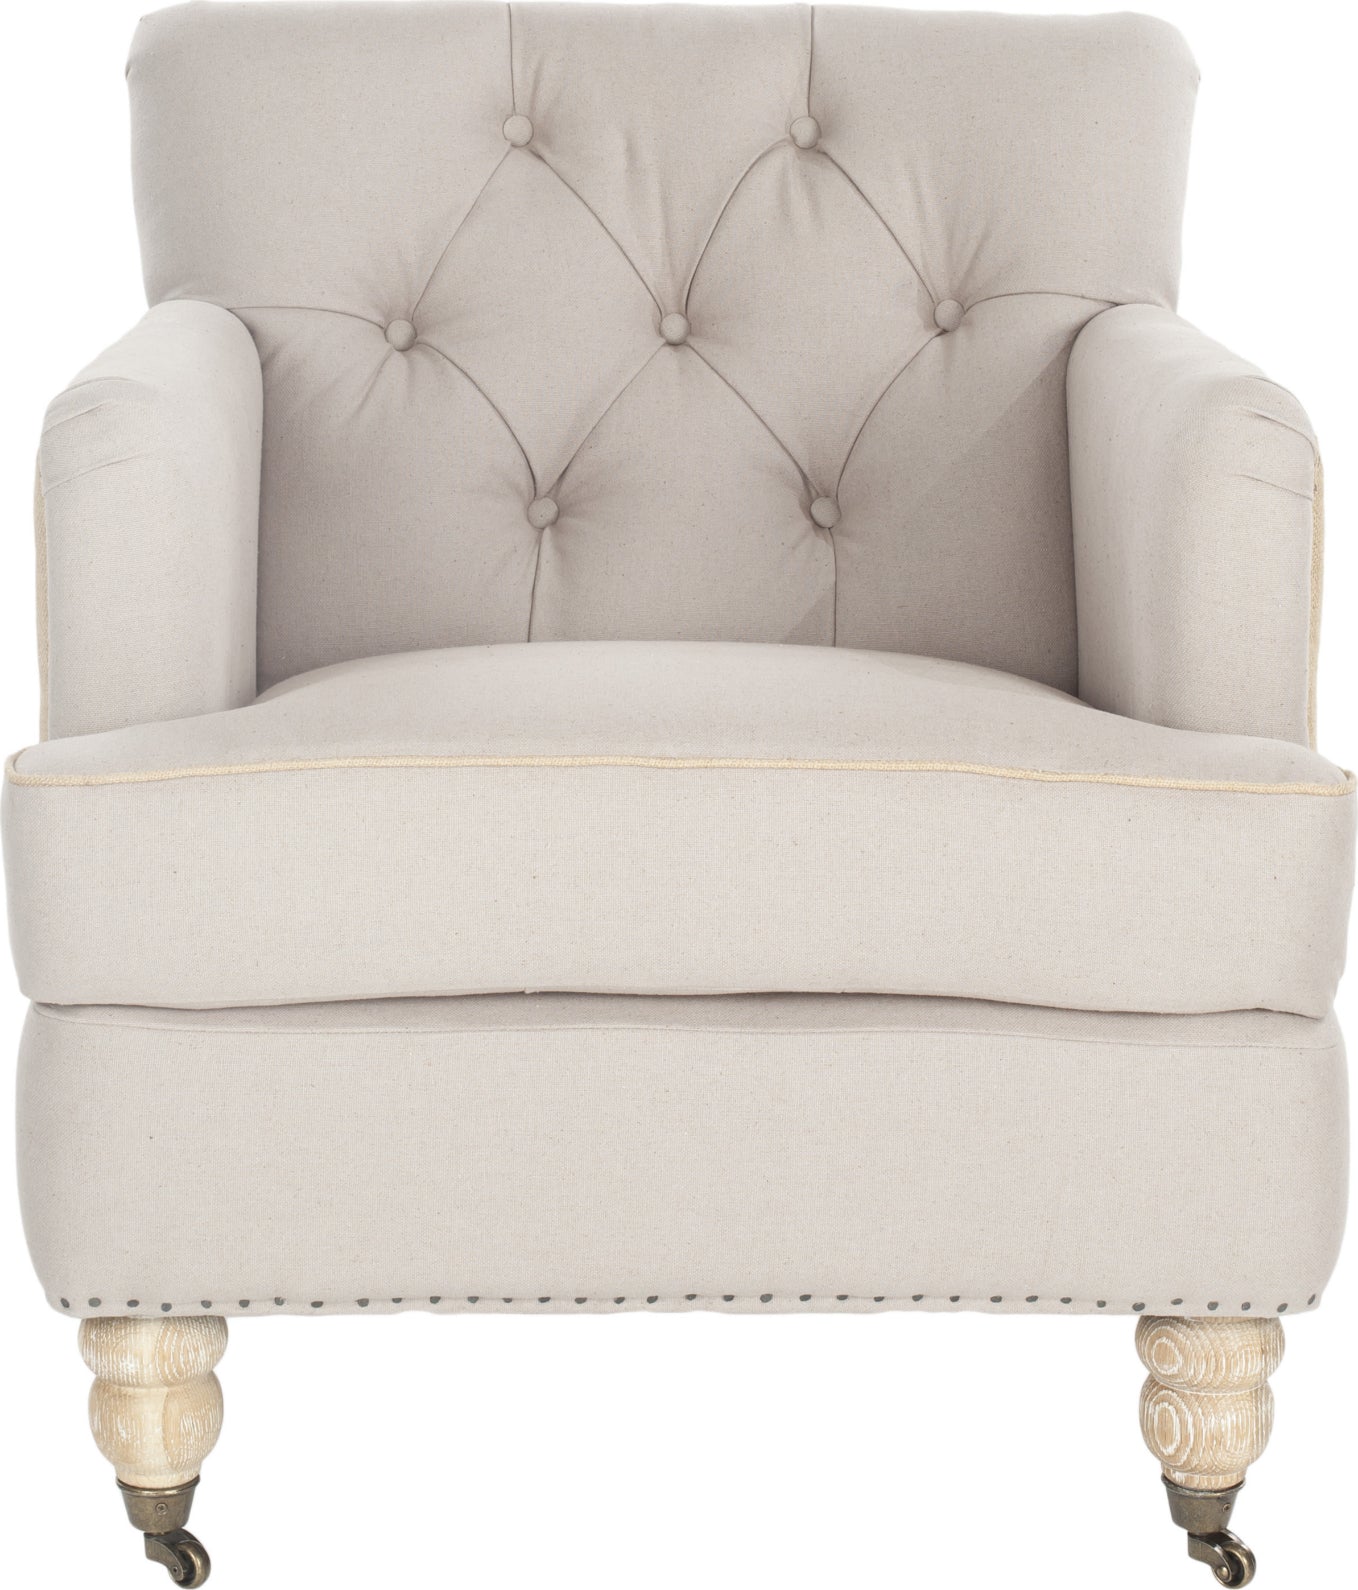 Safavieh Colin Tufted Club Chair With Brass Nail Heads Taupe and Beige White Wash Furniture main image